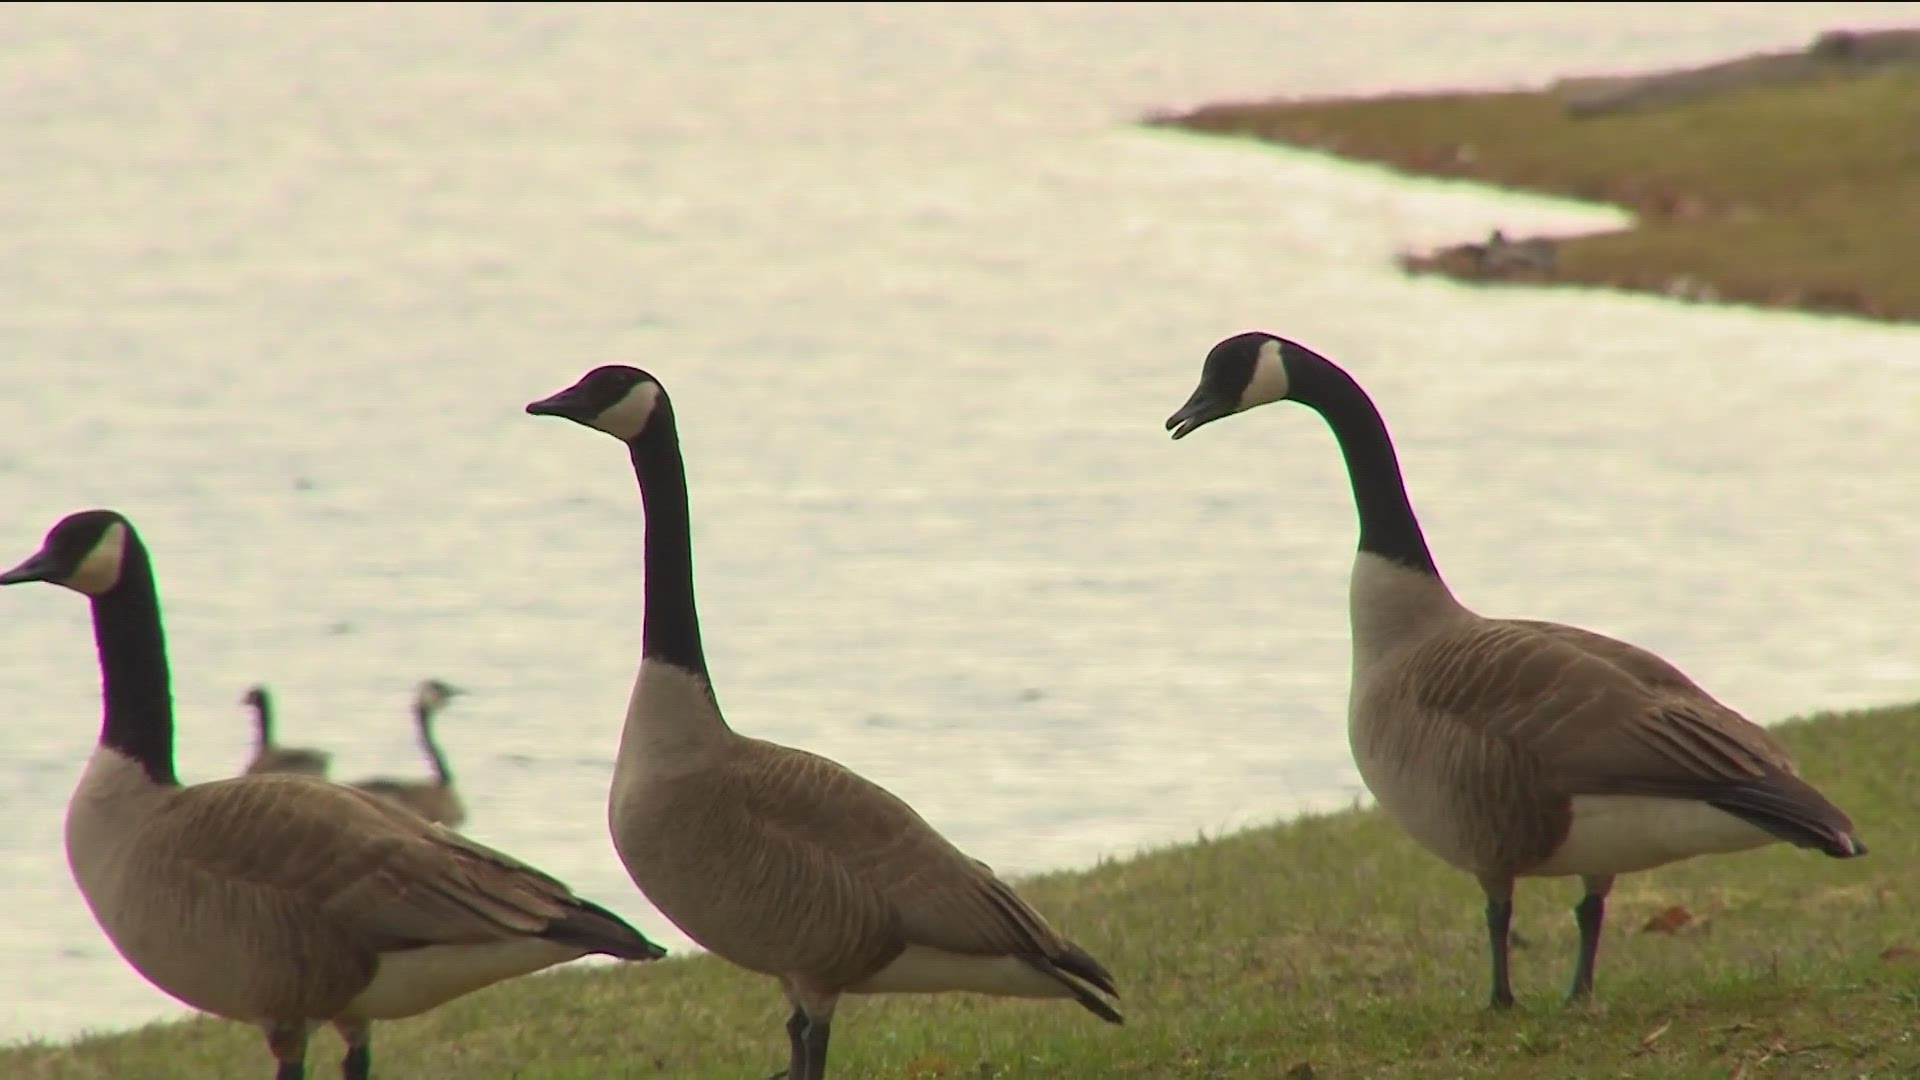 Ohio Geese Control is a humane goose removal system. They use border collies to encourage the birds to go to wetlands instead of parks or your backyard.